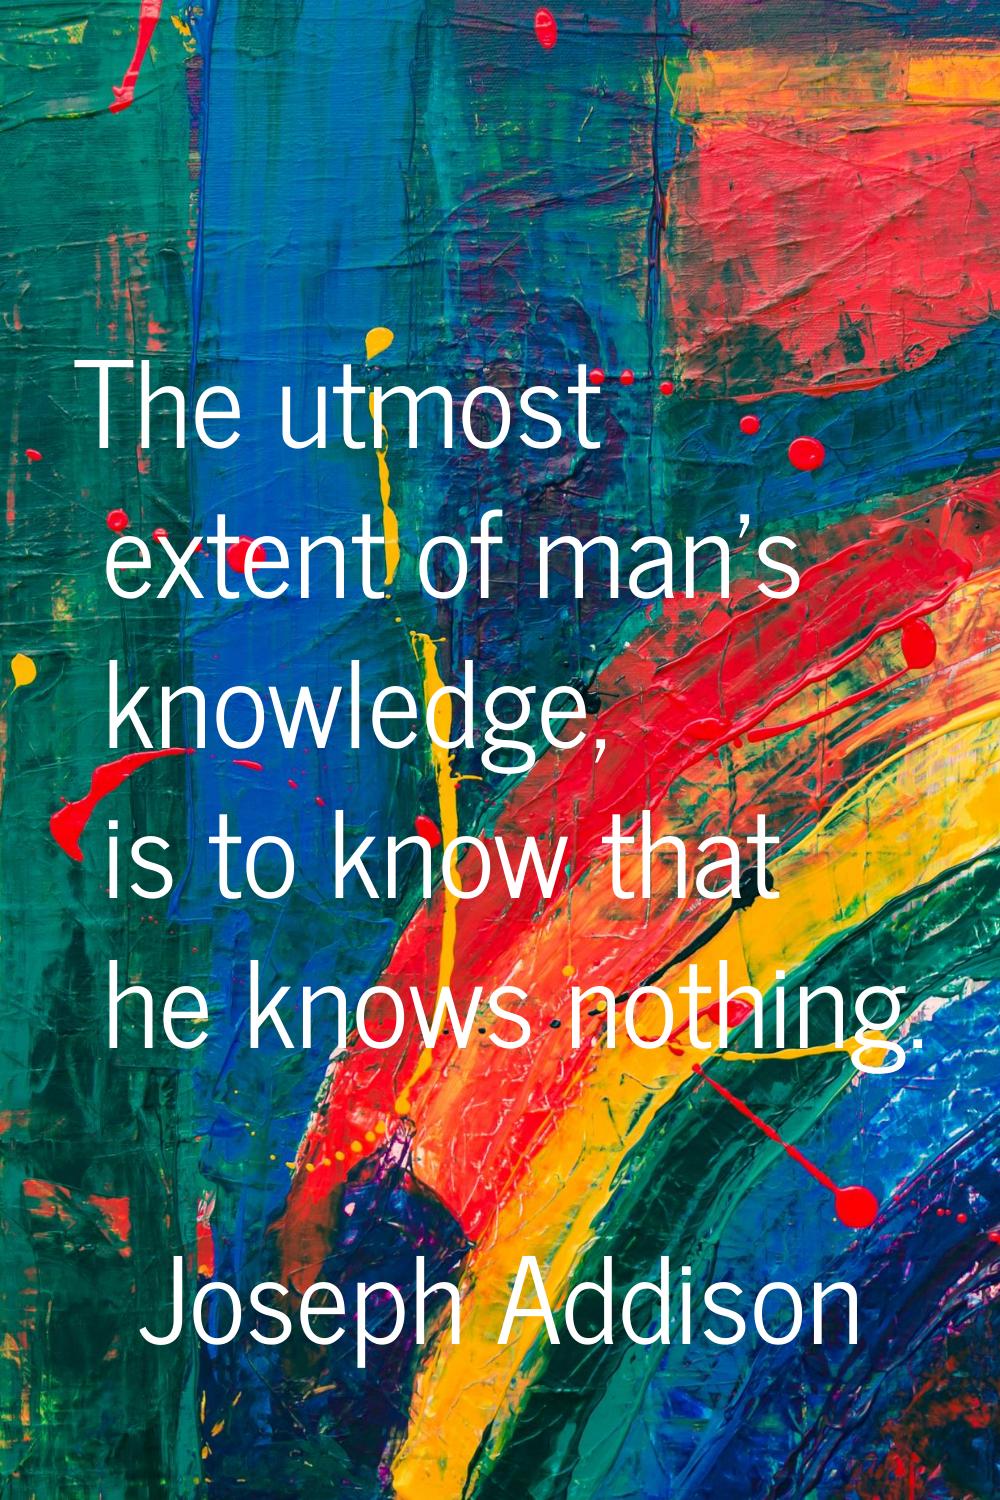 The utmost extent of man's knowledge, is to know that he knows nothing.